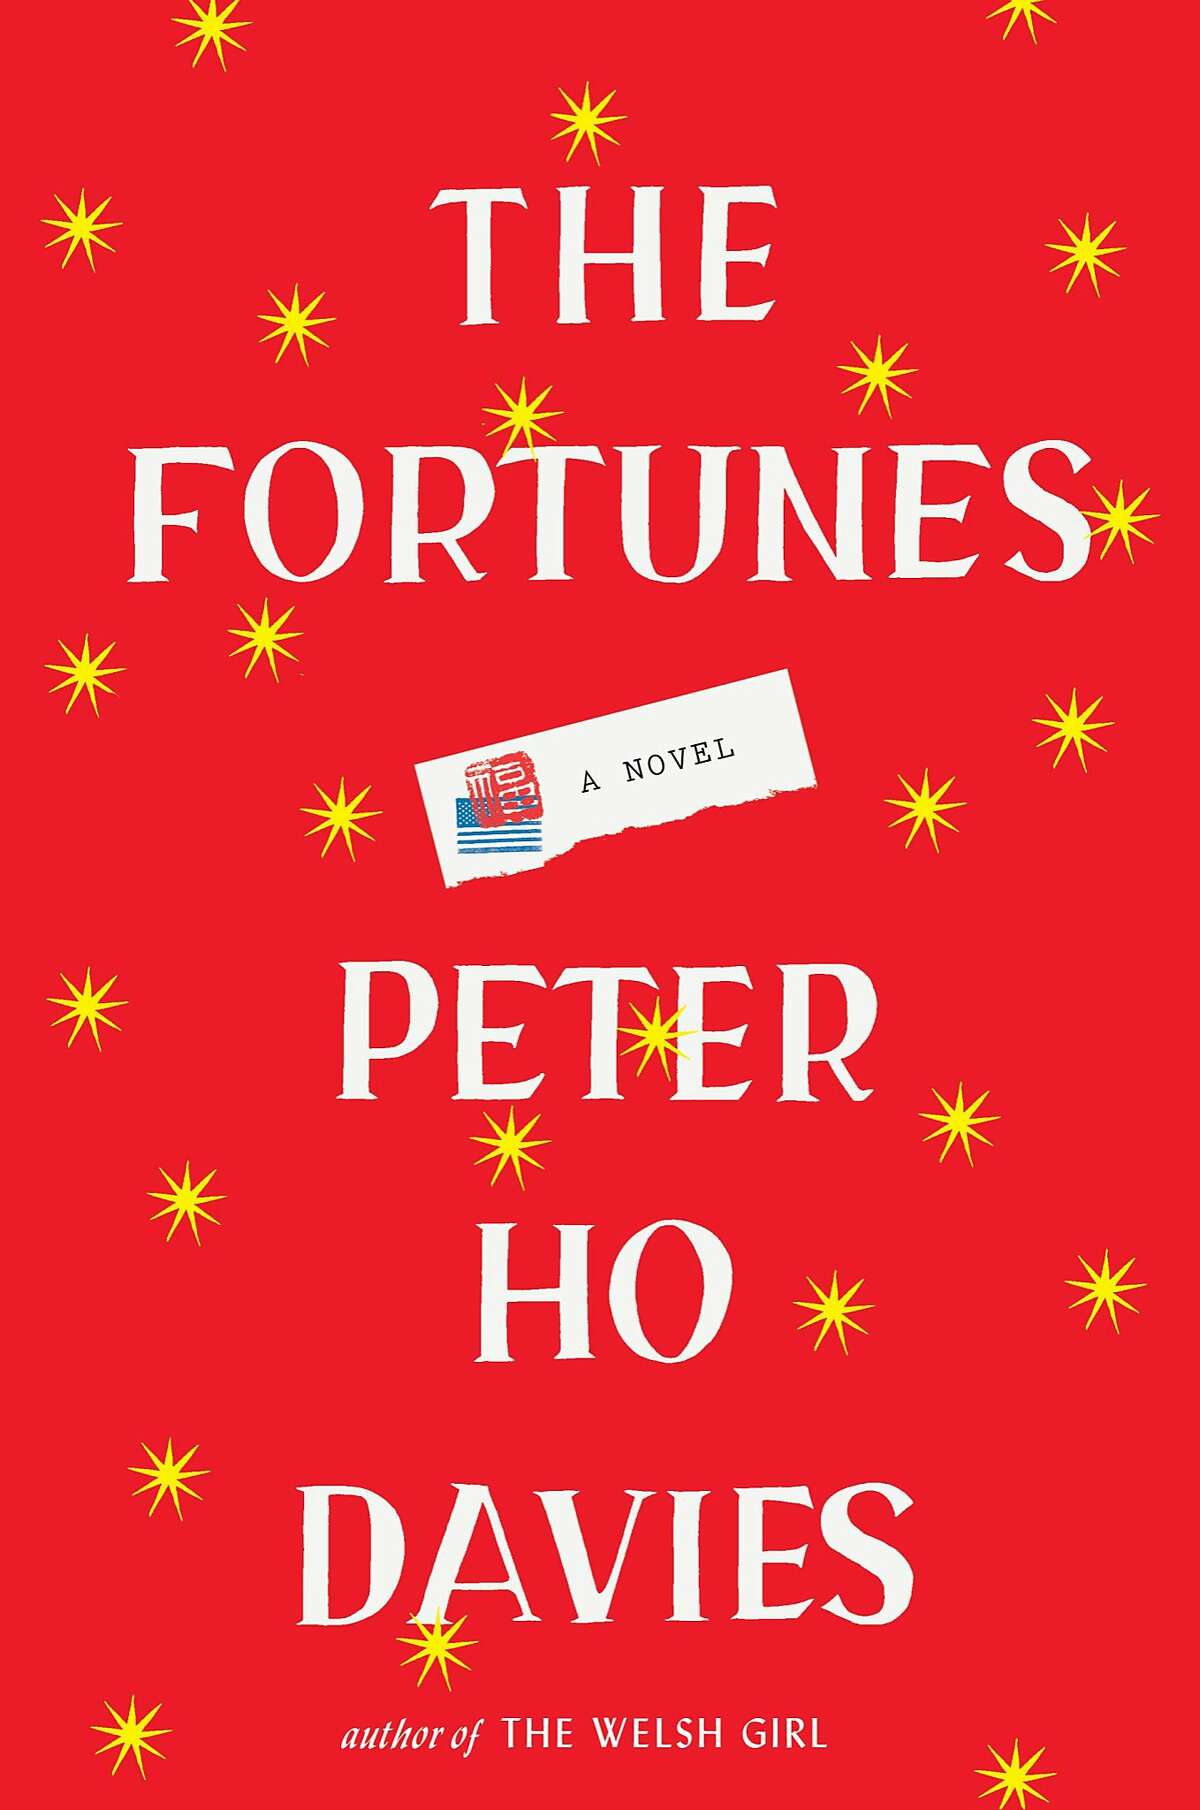 the fortunes by peter ho davies sat